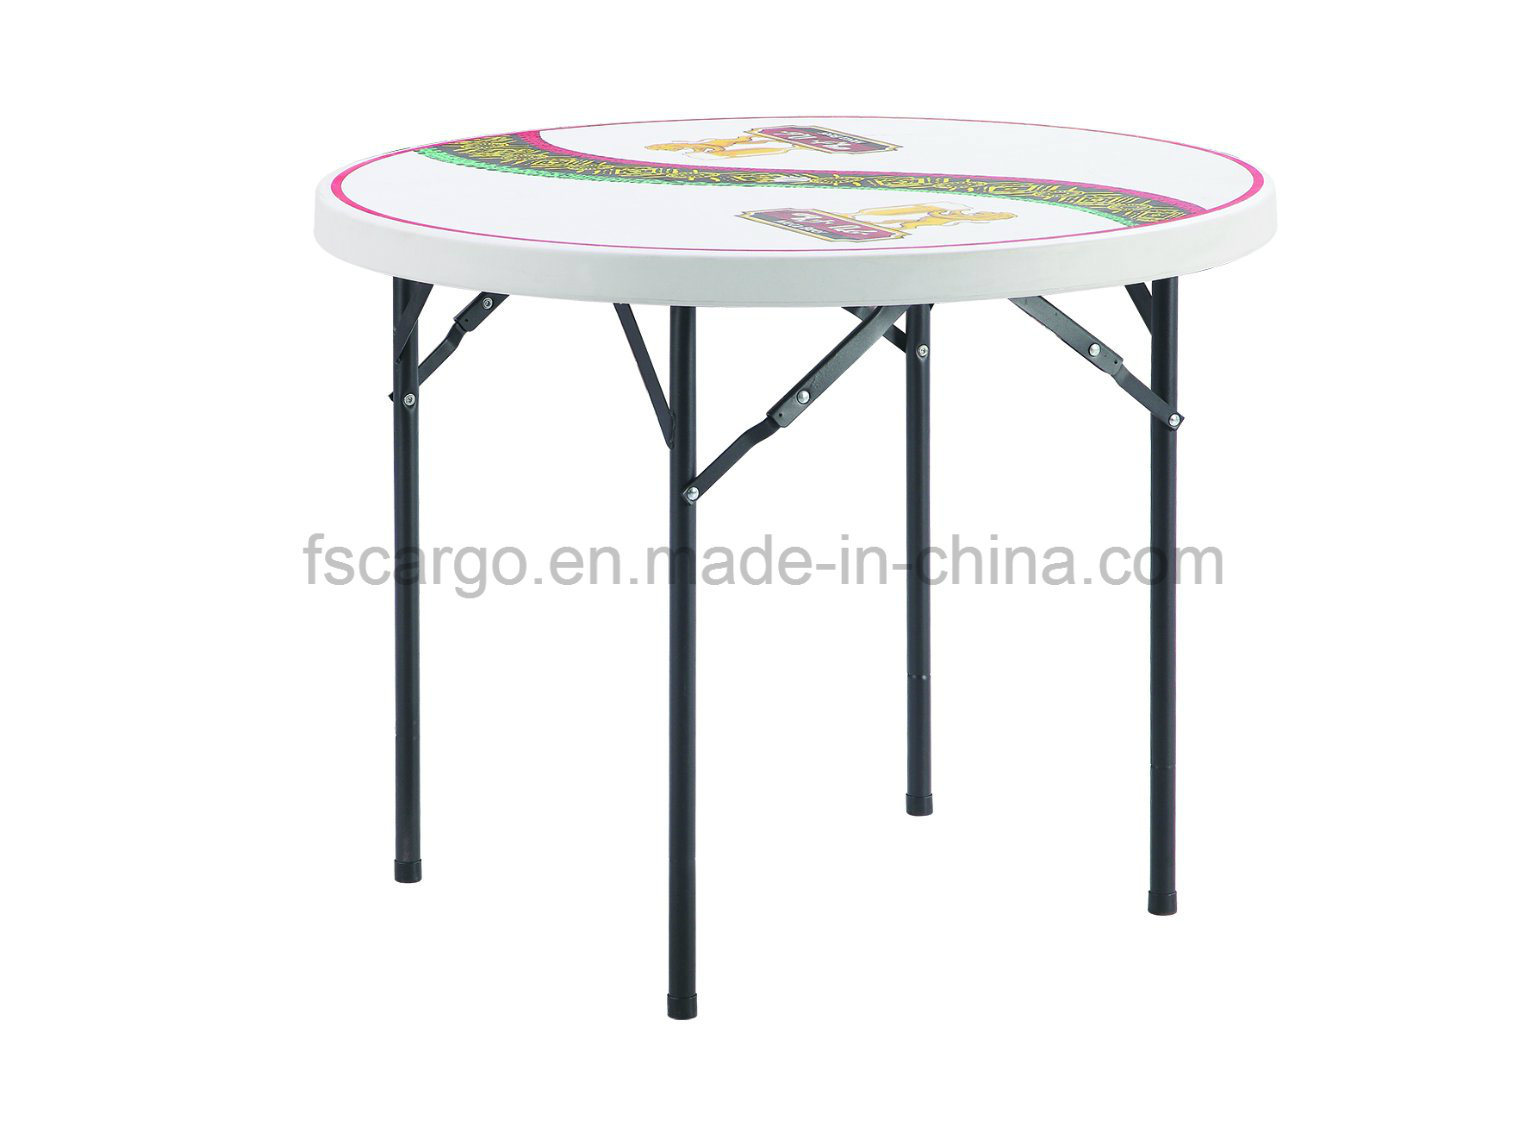 3FT HDPE Folding Round Table for Coffee Shop Used (CG-Y94)